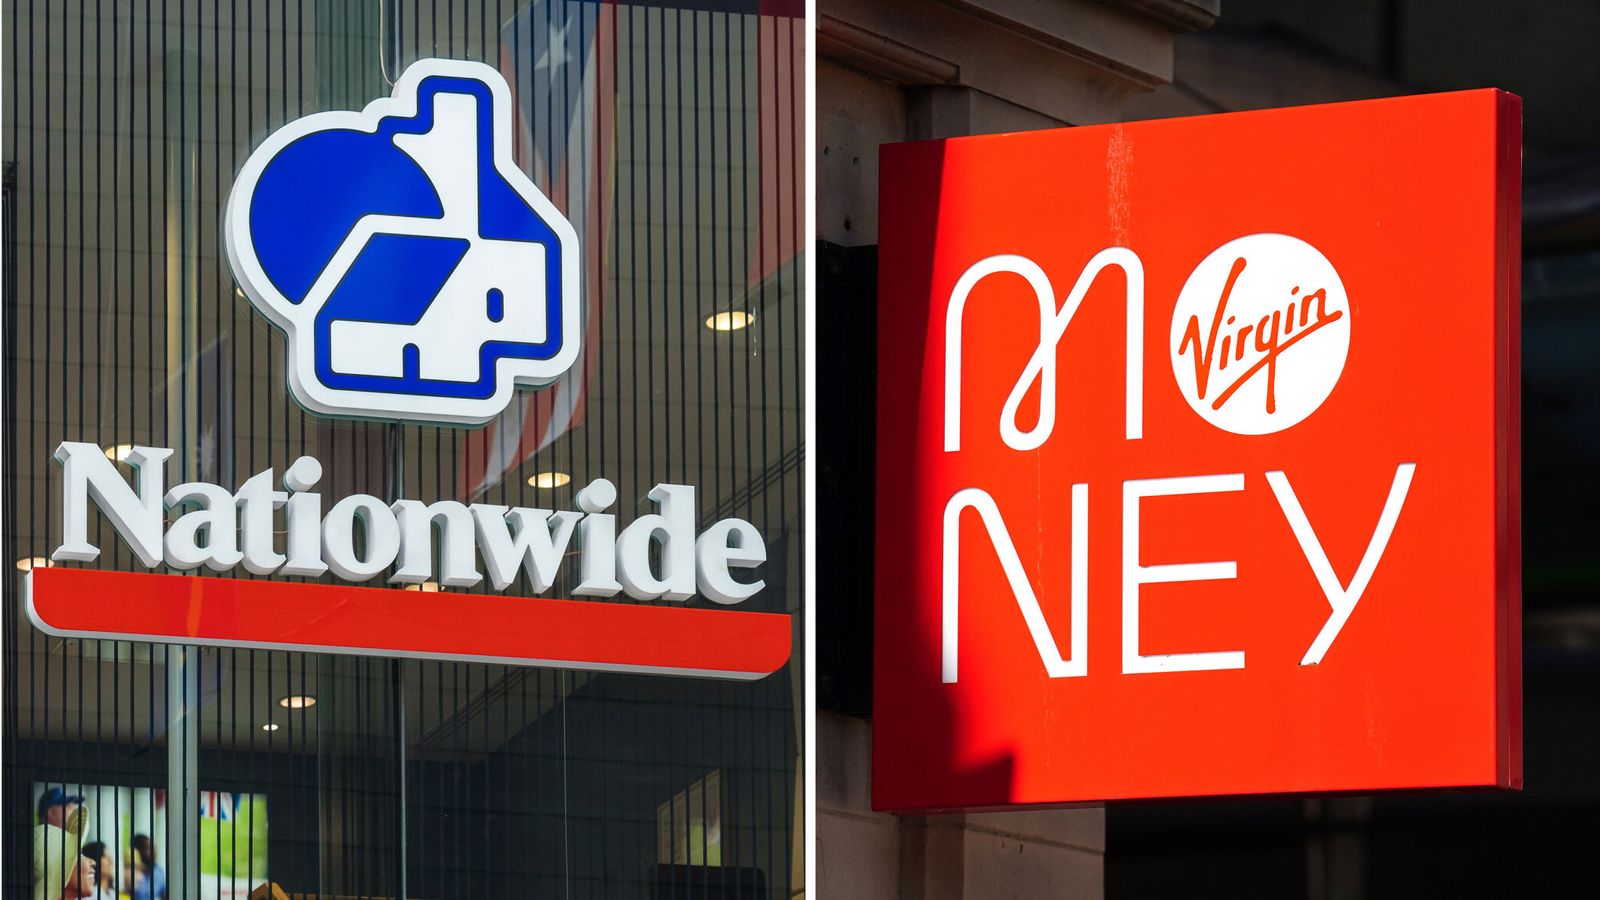 Nationwide agrees terms for £2.9bn takeover of Virgin Money